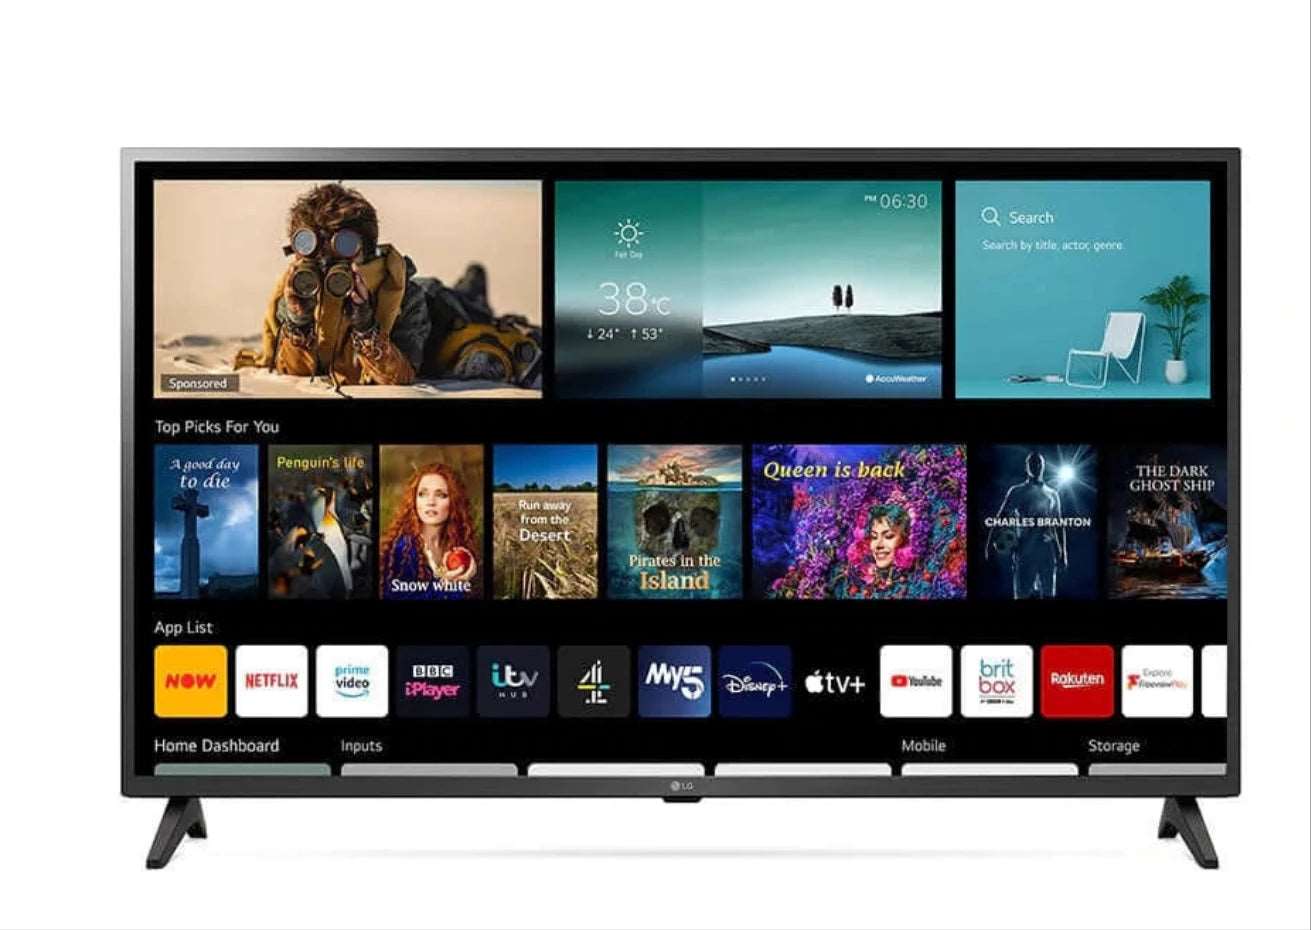 LG 43UP75006LF 43 inch 4K UHD HDR Smart LED TV (2021 Model) with Freeview Play, Prime Video, Netflix, Disney+